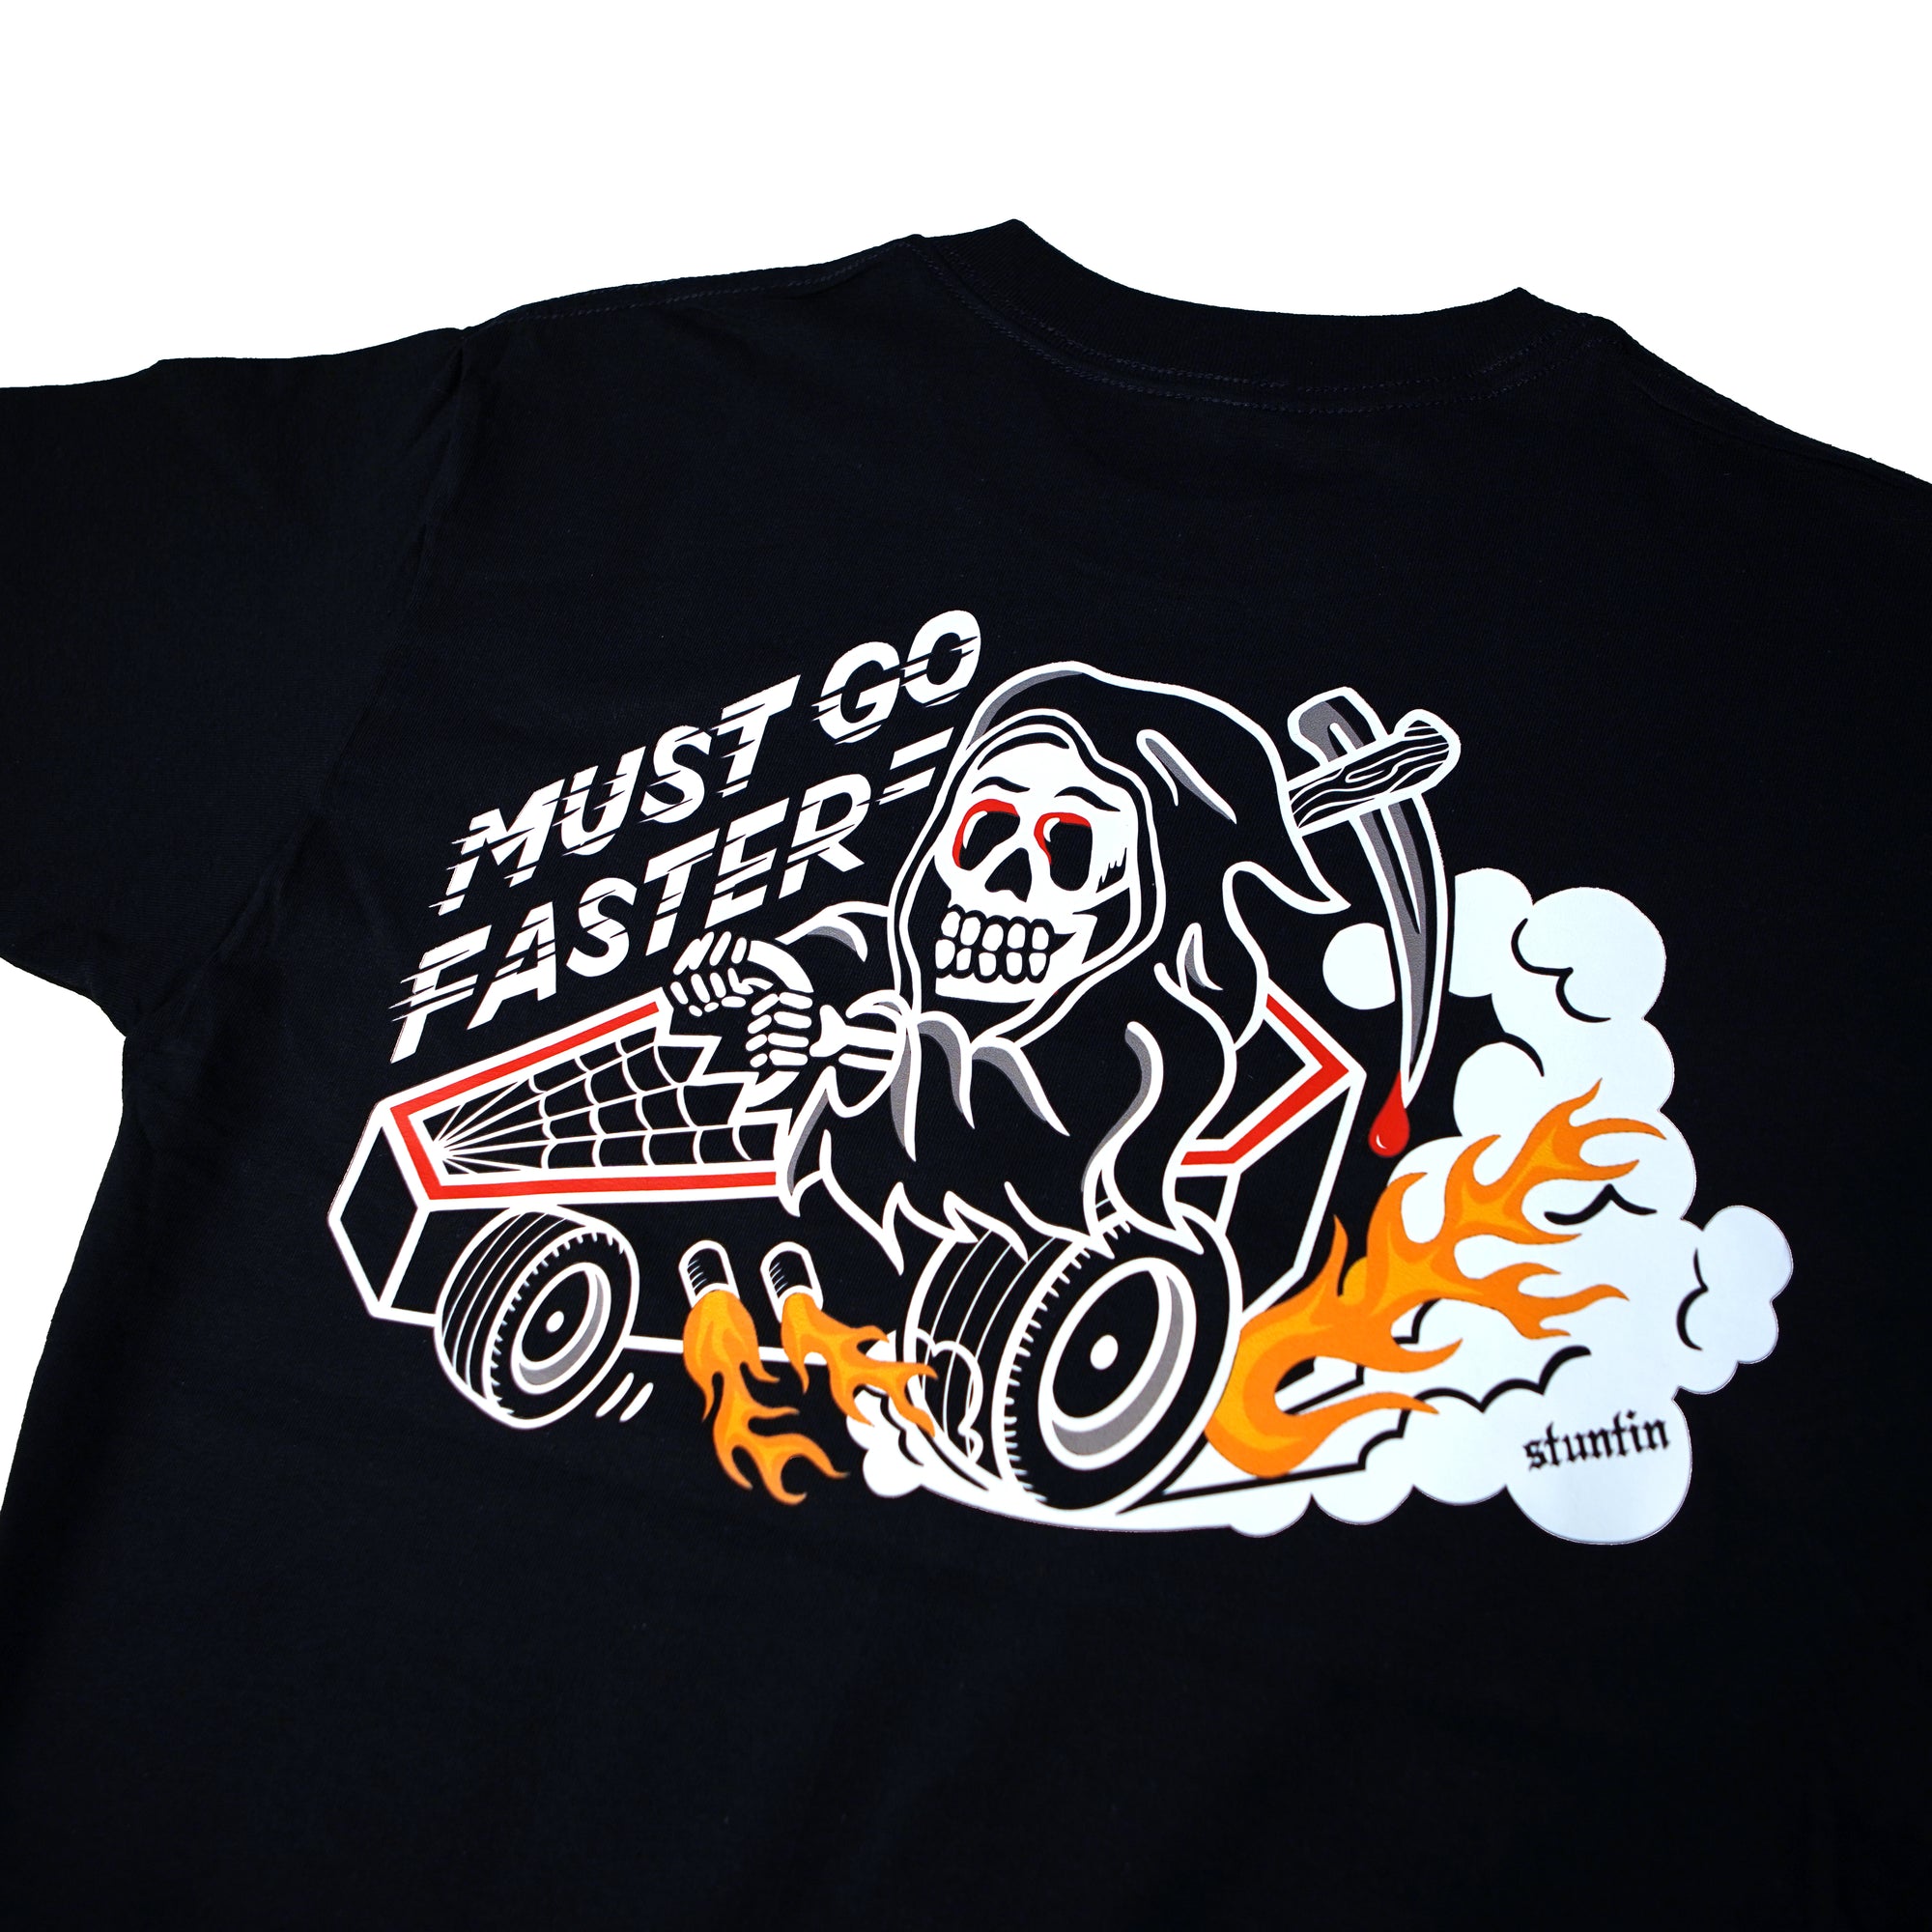 Must Go Faster Shirt